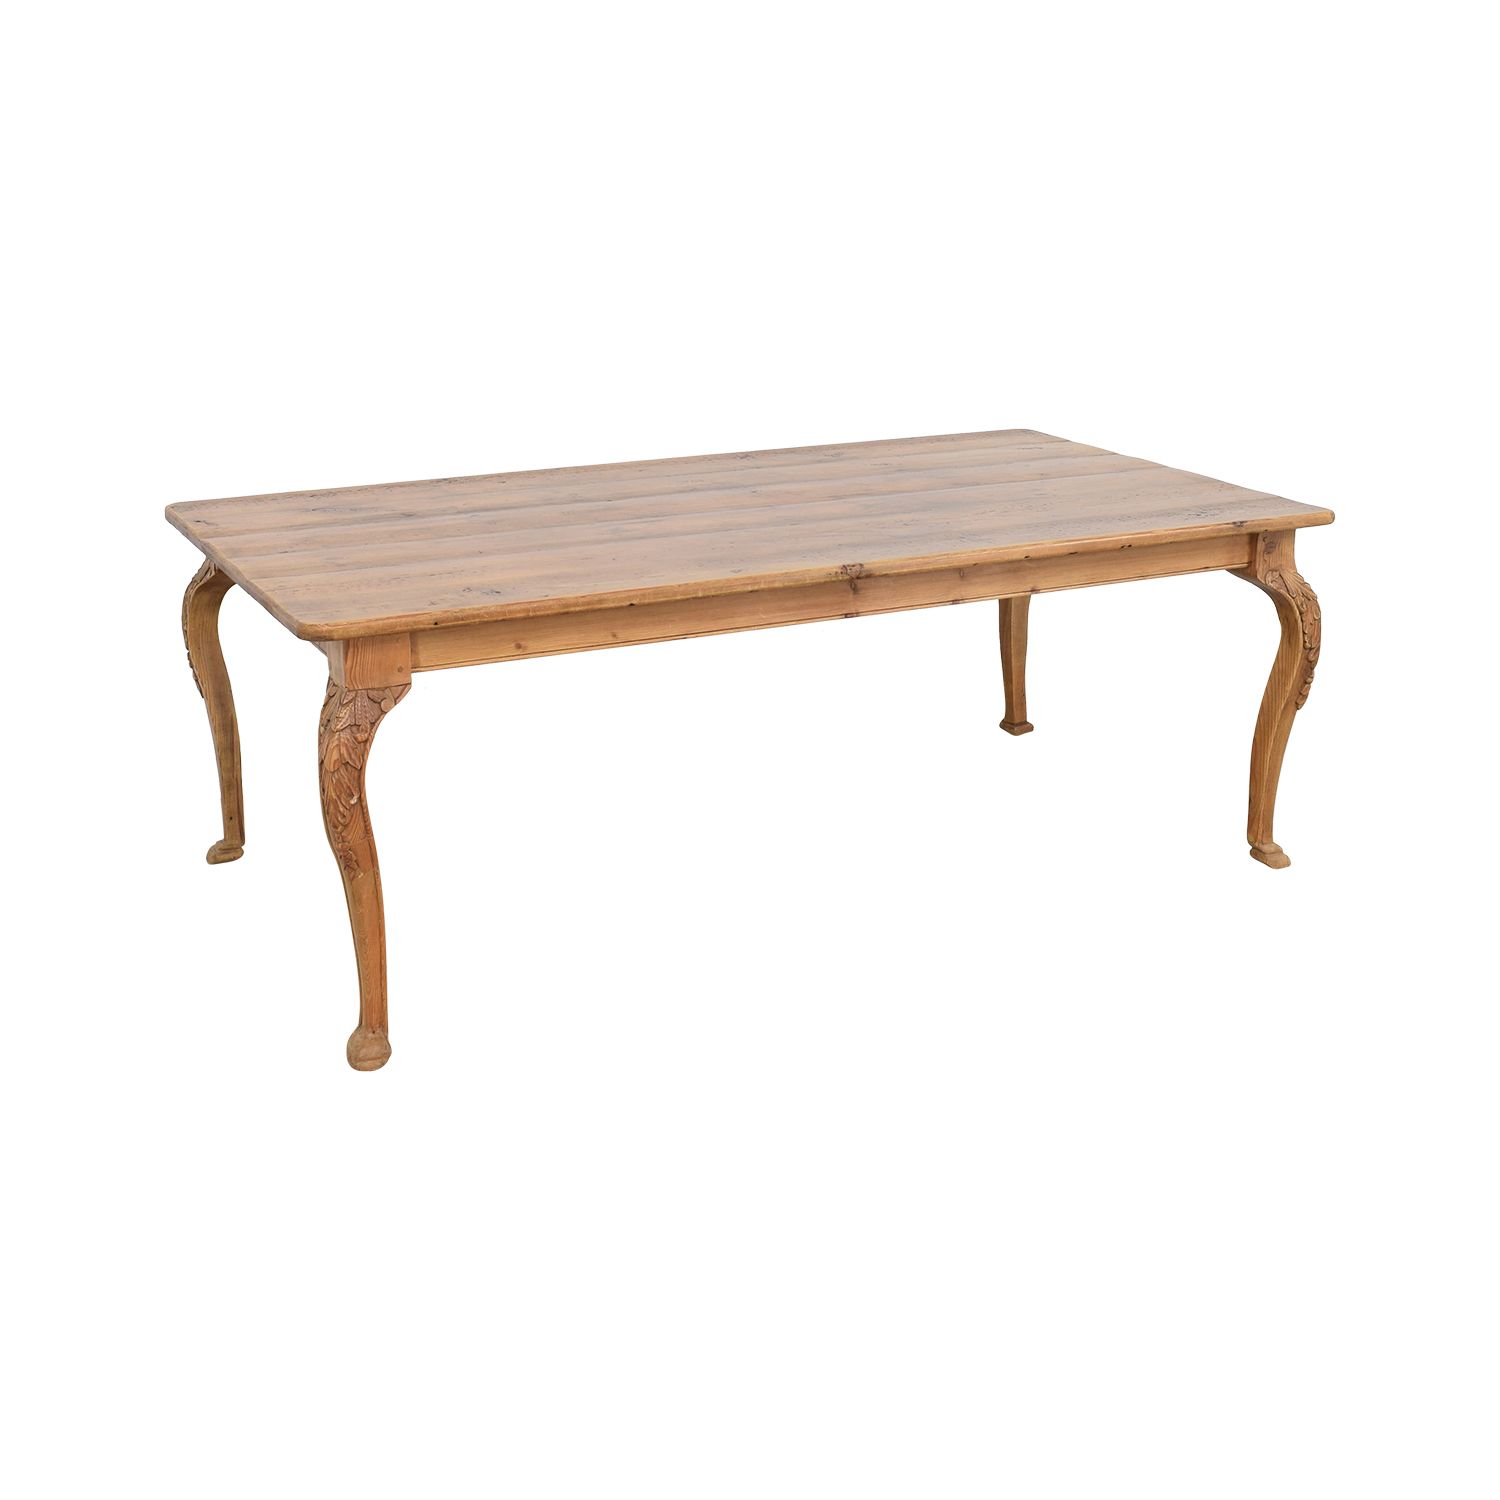 [%64% Off – Rectangular Dining Table / Tables In Most Recent Rectangular Dining Tables|rectangular Dining Tables Inside Favorite 64% Off – Rectangular Dining Table / Tables|recent Rectangular Dining Tables With Regard To 64% Off – Rectangular Dining Table / Tables|most Recent 64% Off – Rectangular Dining Table / Tables Pertaining To Rectangular Dining Tables%] (View 6 of 25)